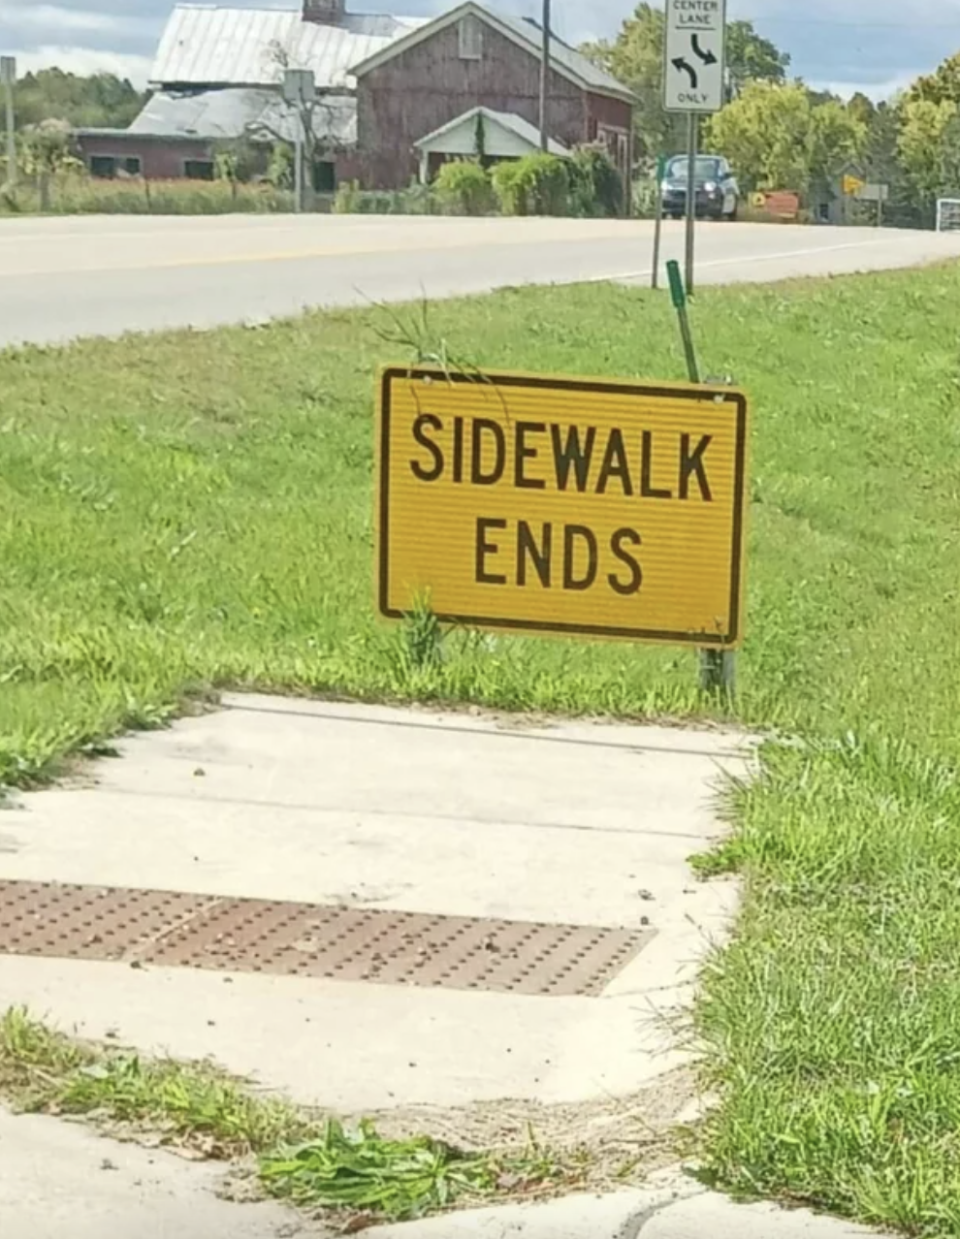 sidewalk ends sign at the end of the sign